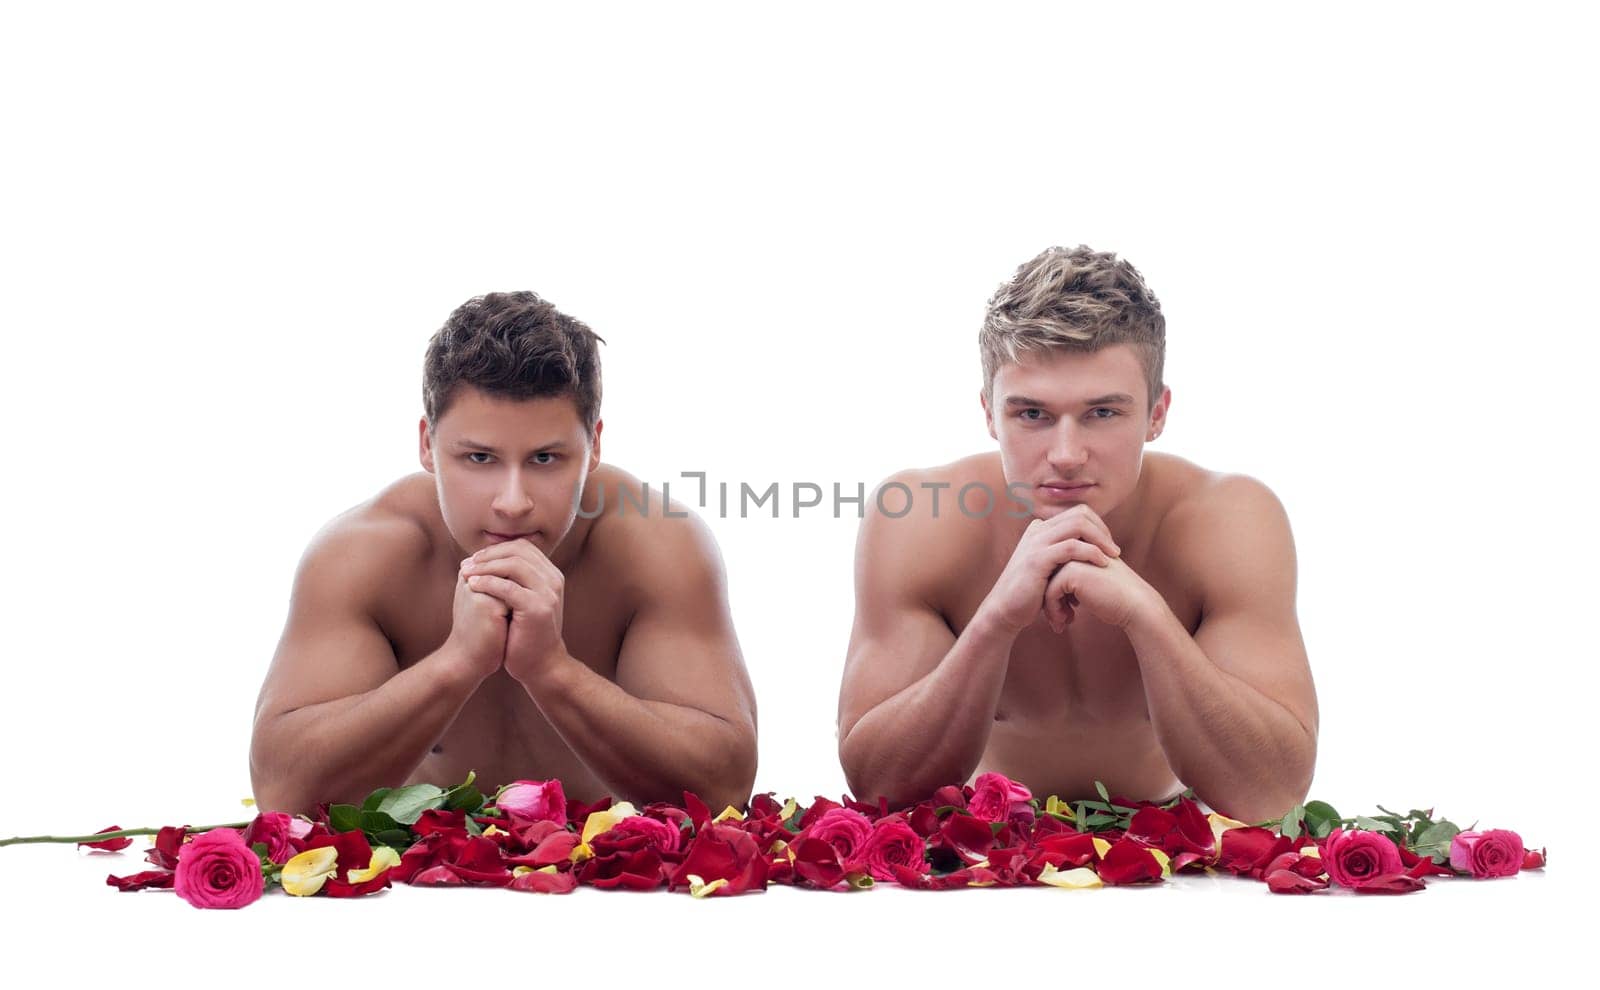 Image of two handsome men posing naked with rose petals